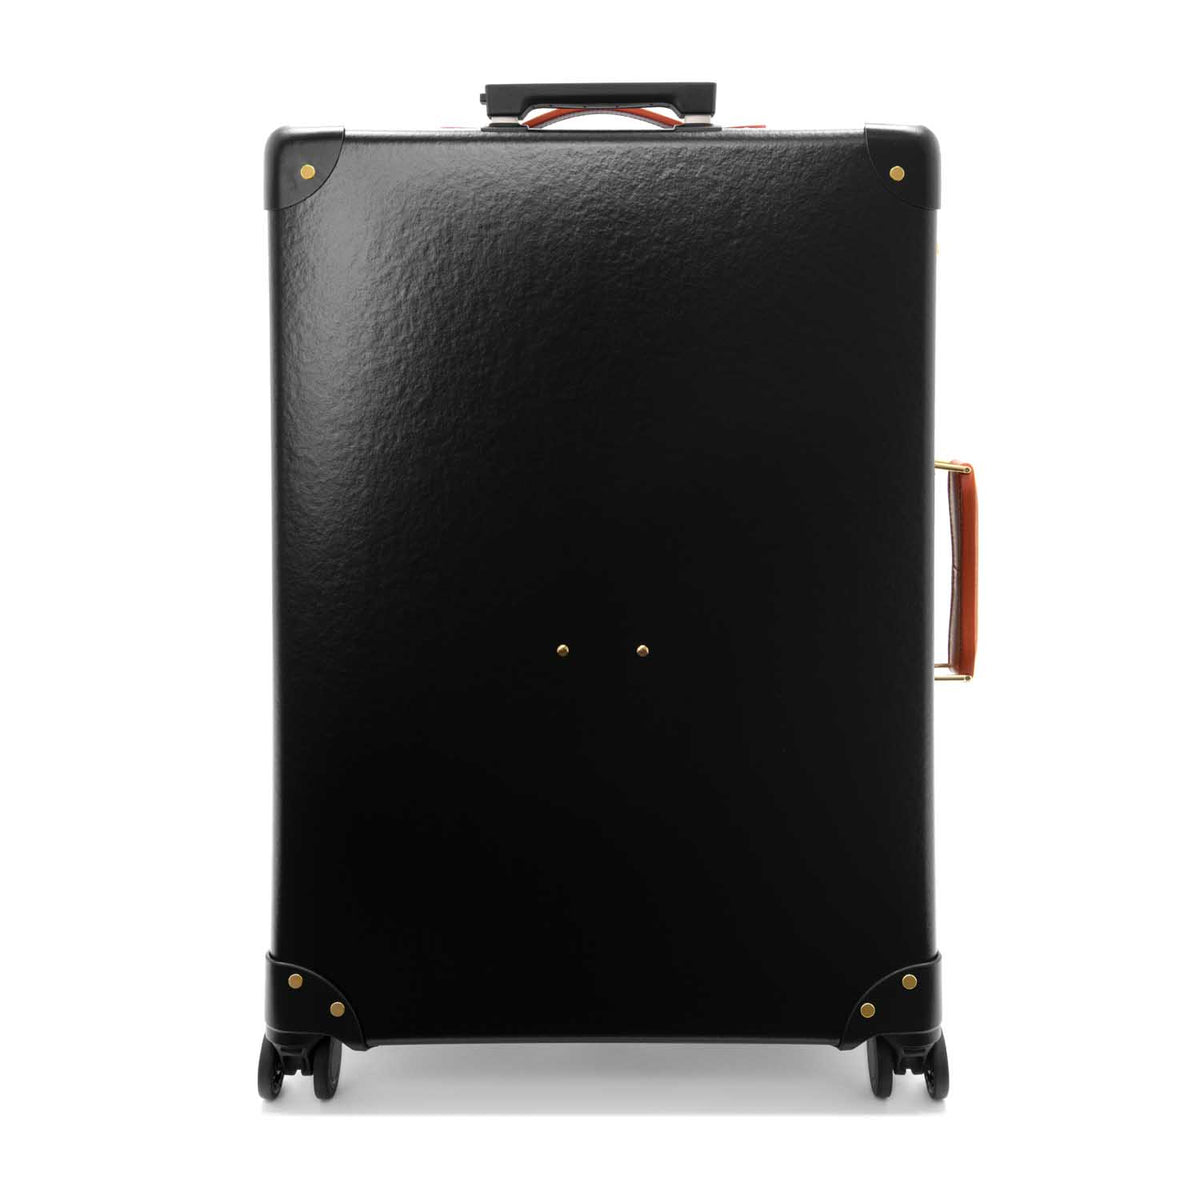 James Bond Large Check-In Trolley Case - Octopussy Edition - By Globe-Trotter